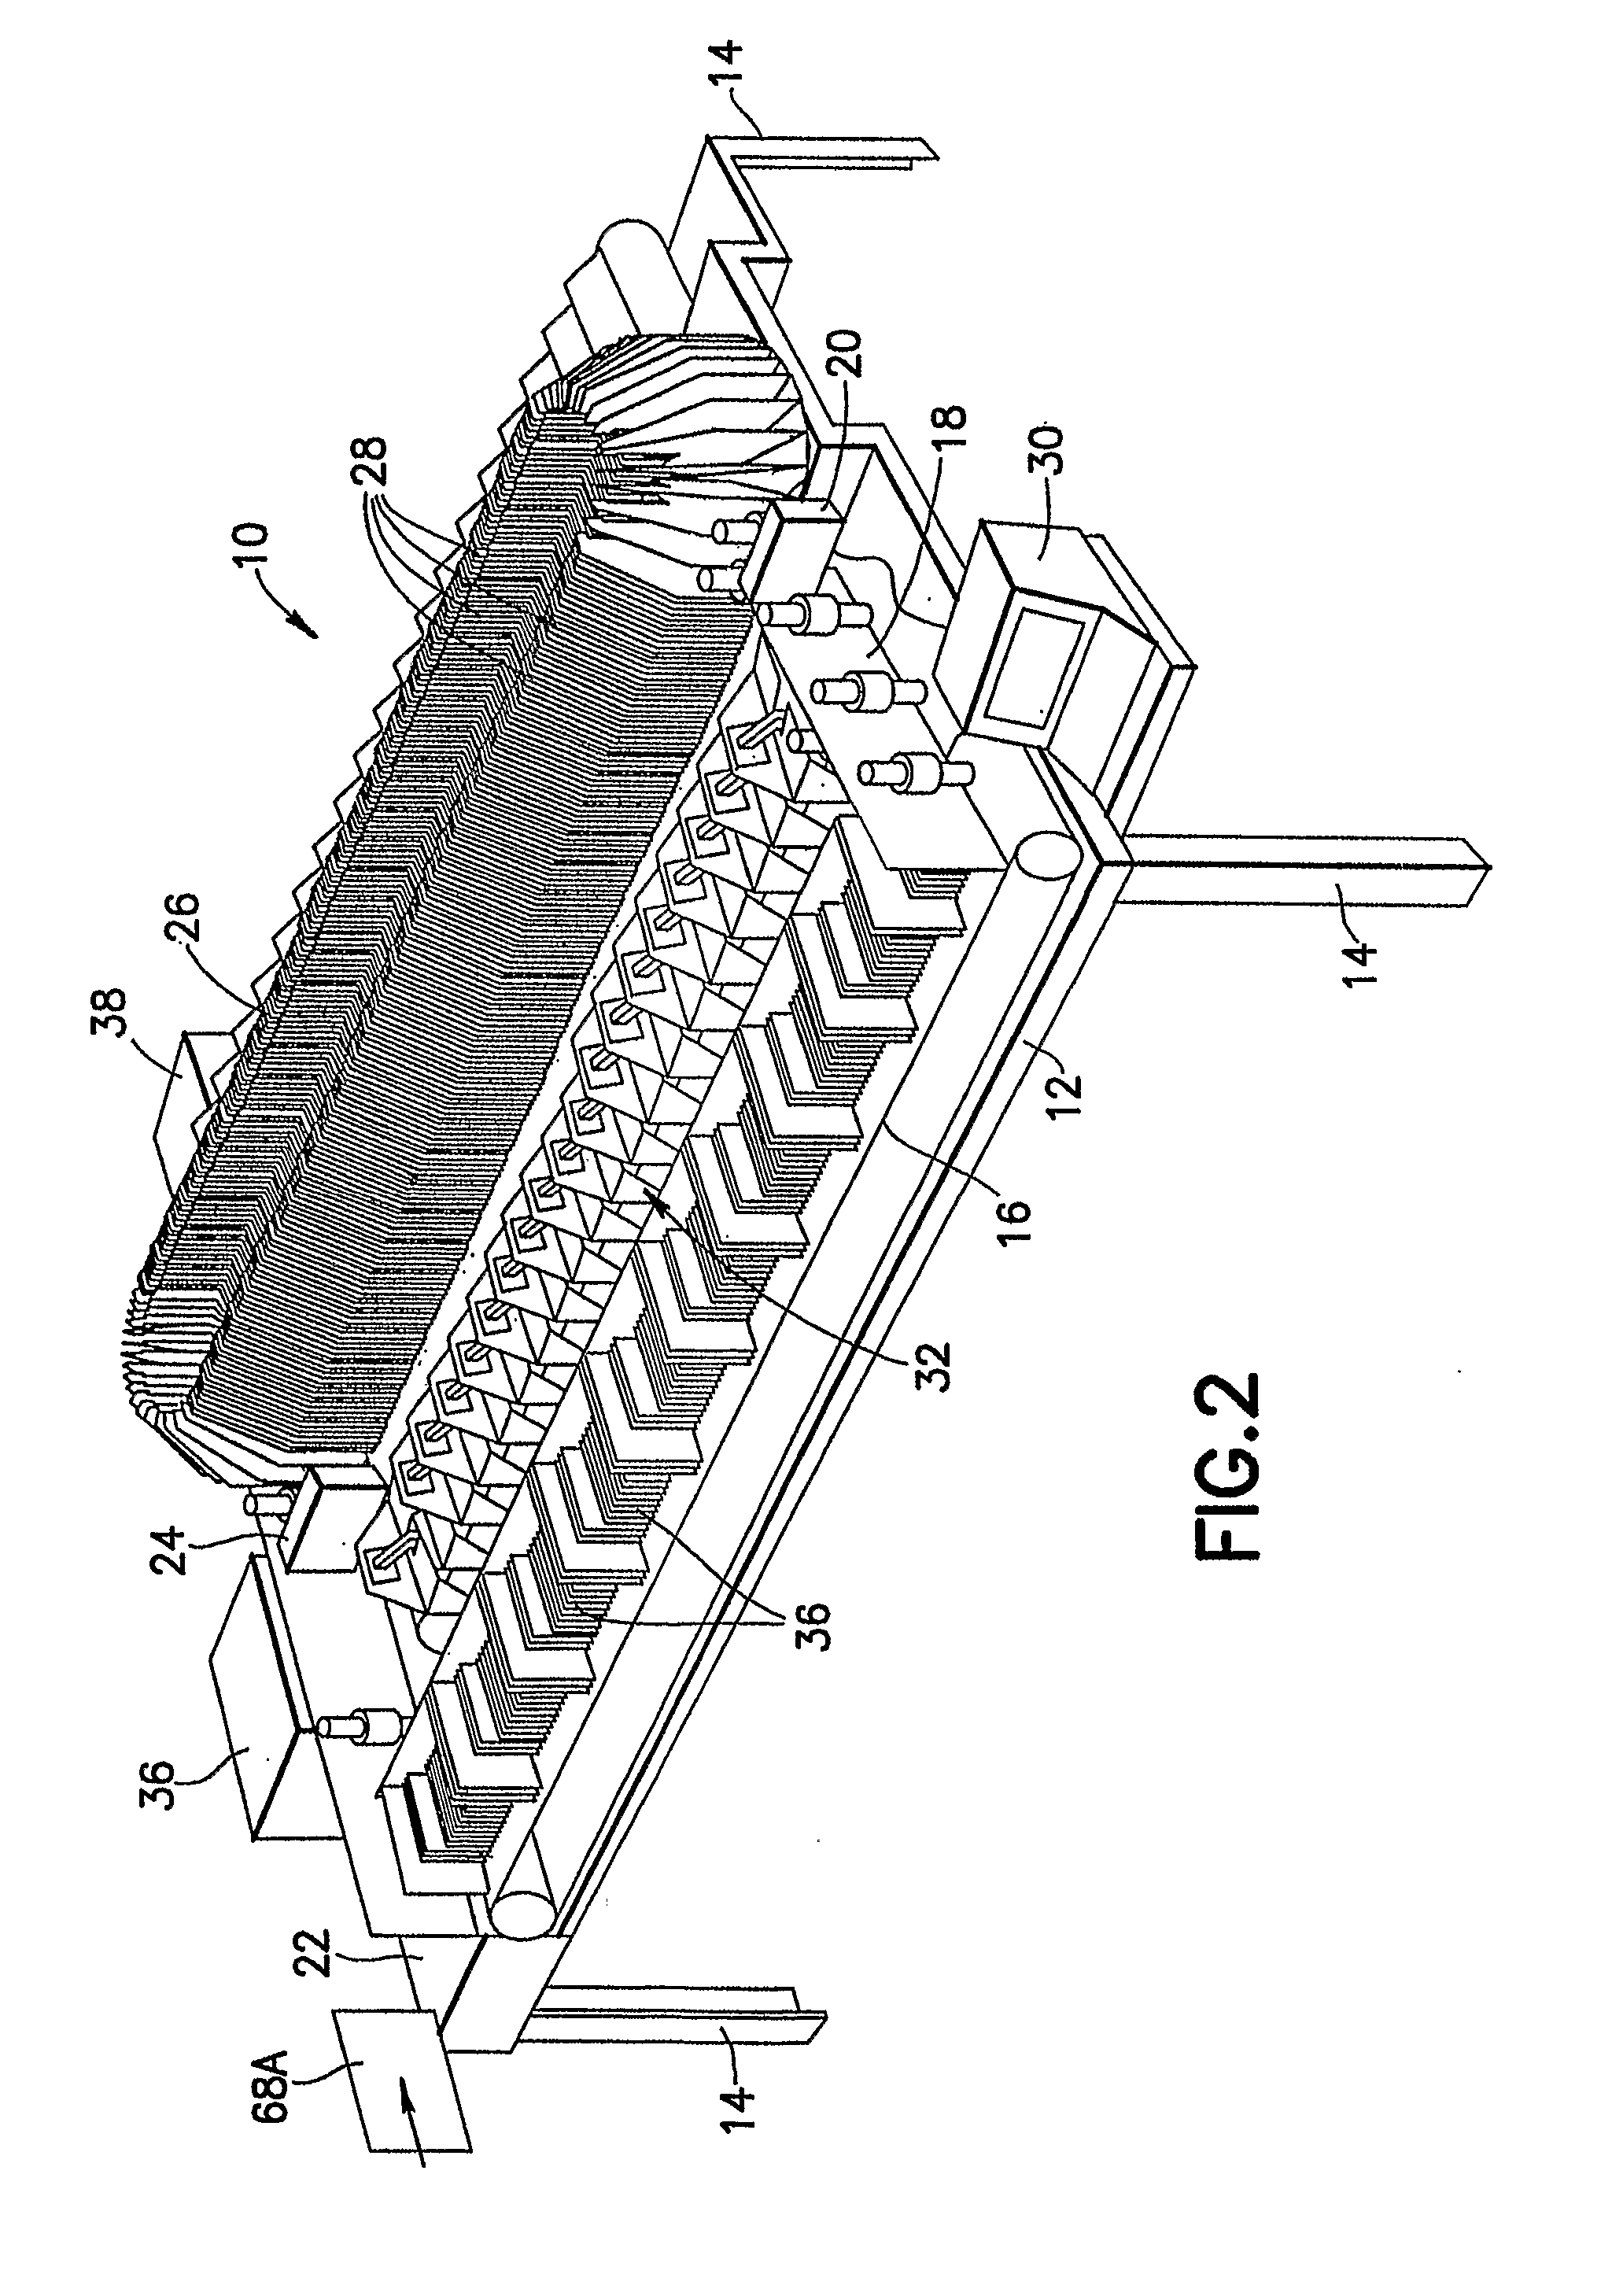 Carrier Delivery Sequence System And Process Adapted For Upstream Insertion Of Exceptional Mail Pieces